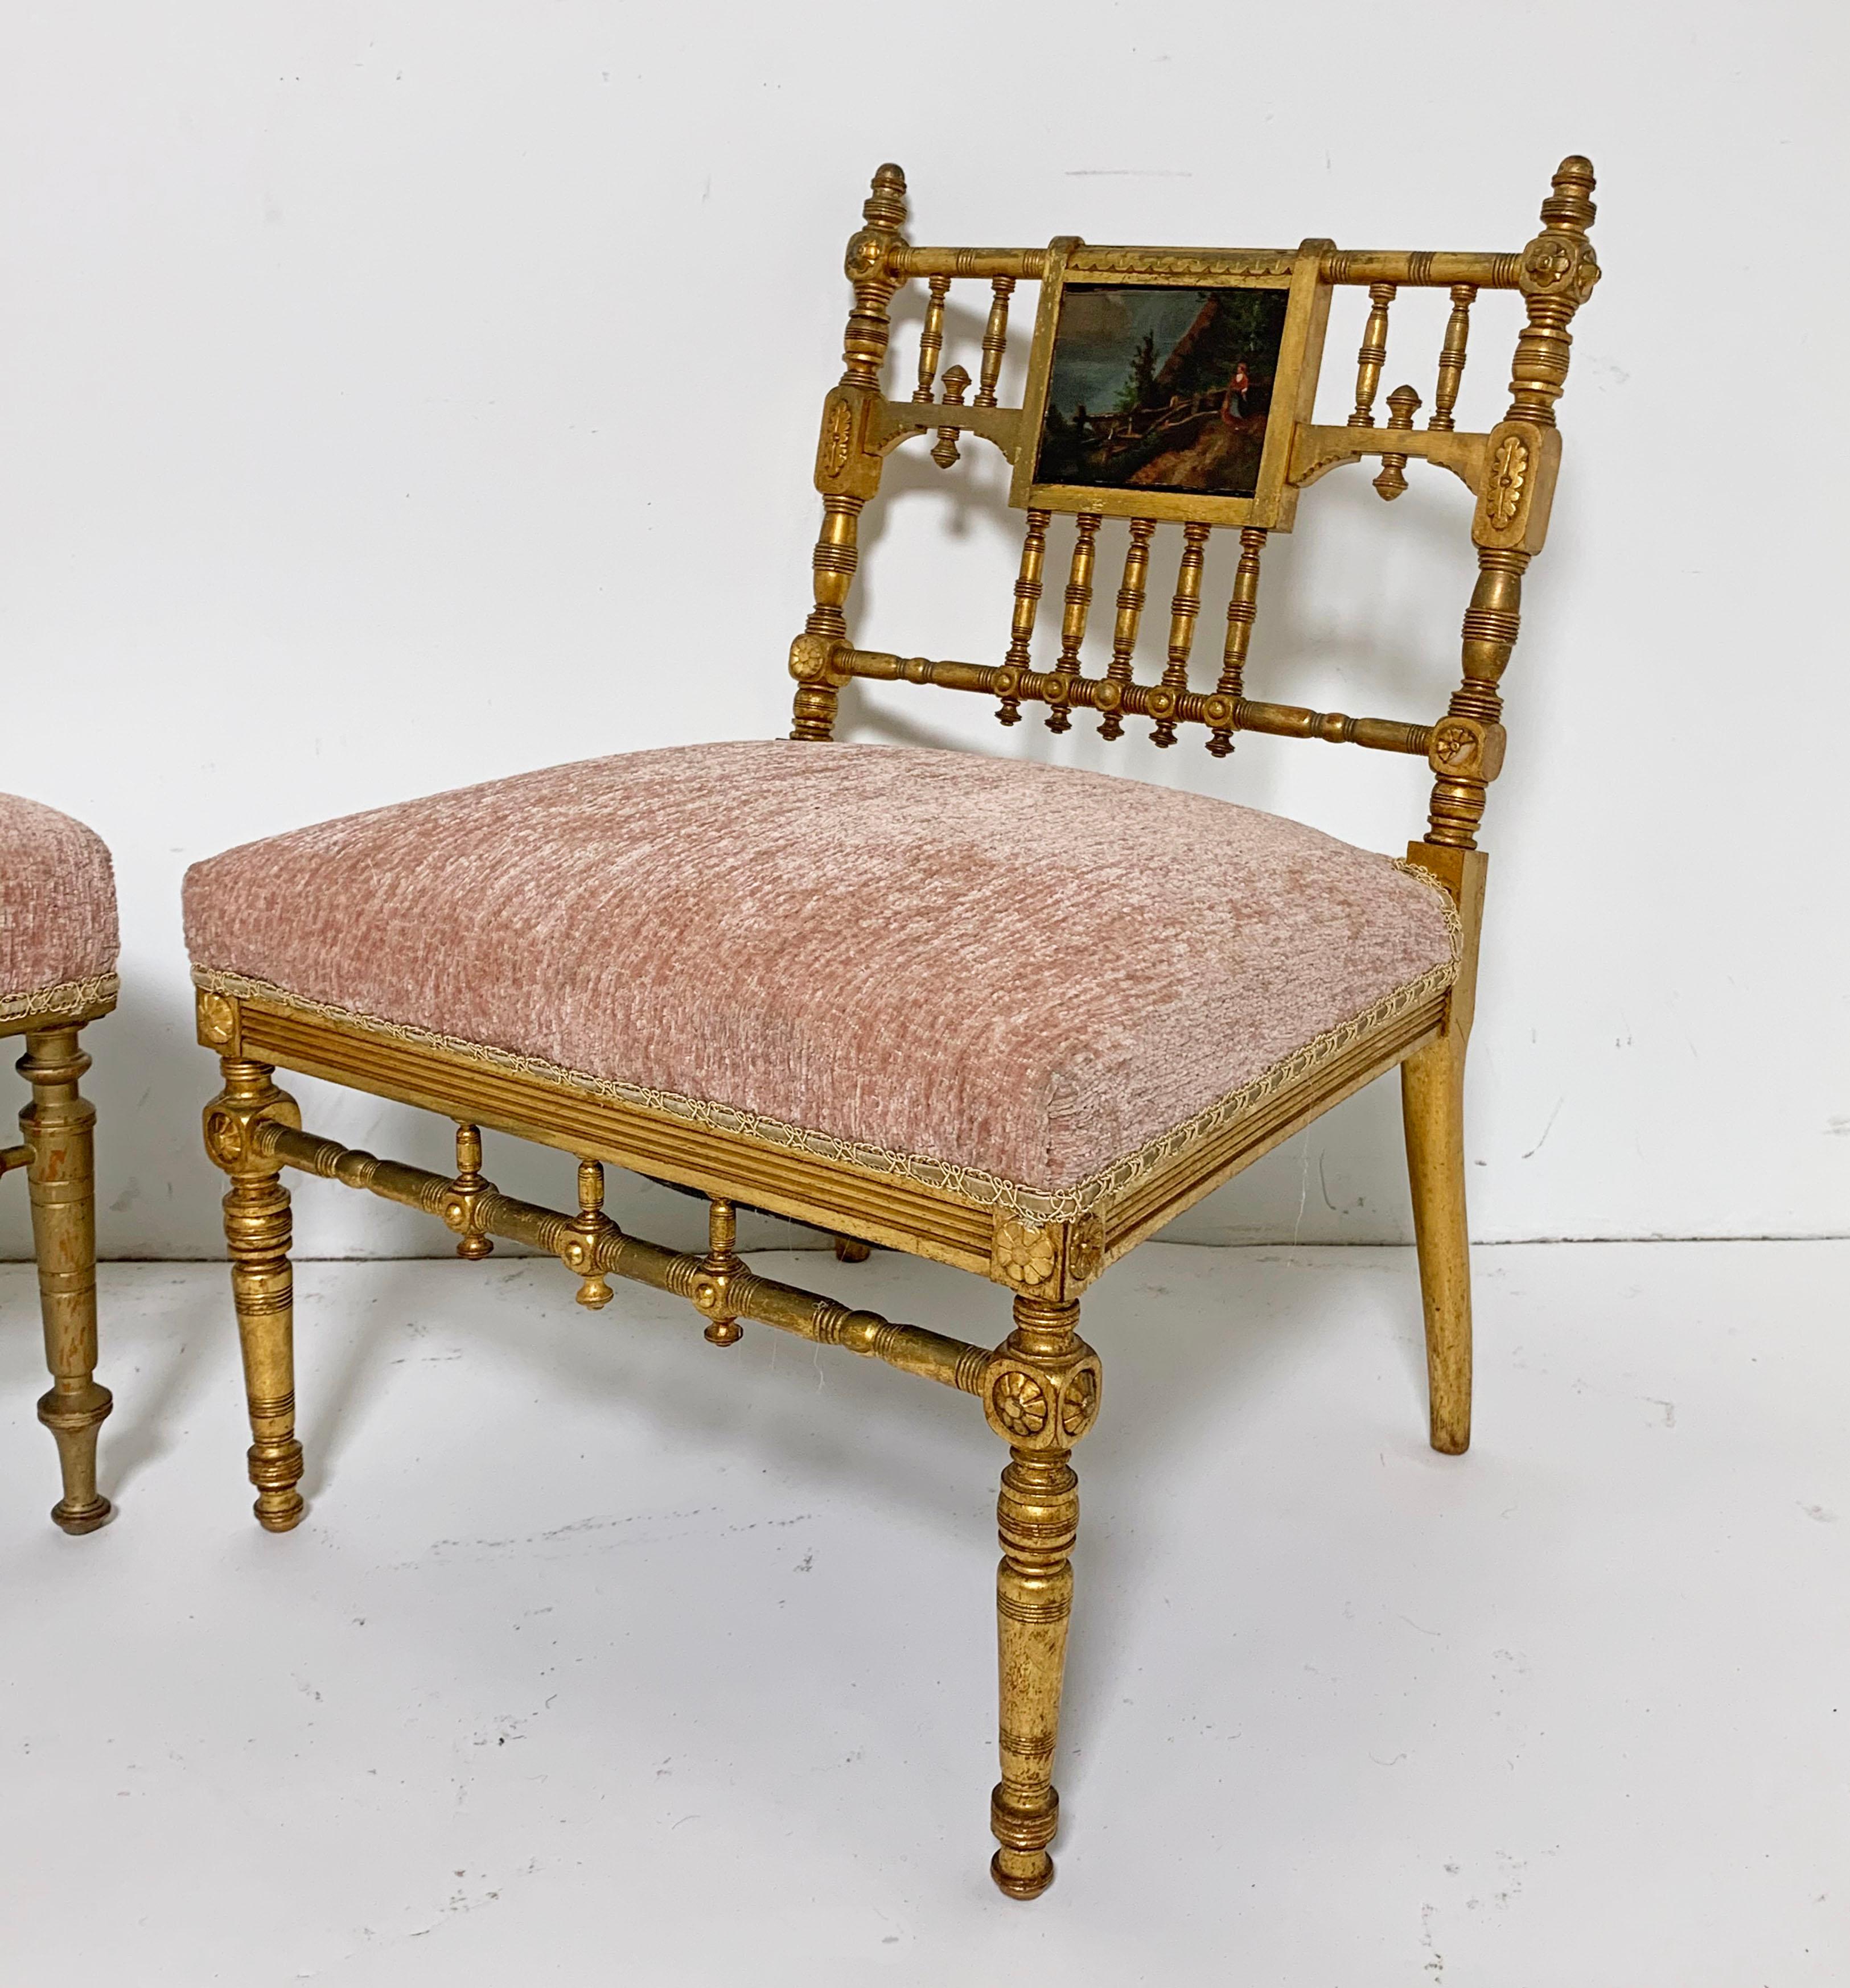 Two American Aesthetic Movement giltwood slipper chairs, most likely by Herter Brothers of New York. The carved giltwood frames consist of turned posts and finials with slight variations in the fretwork adding to their individual appeal. Both